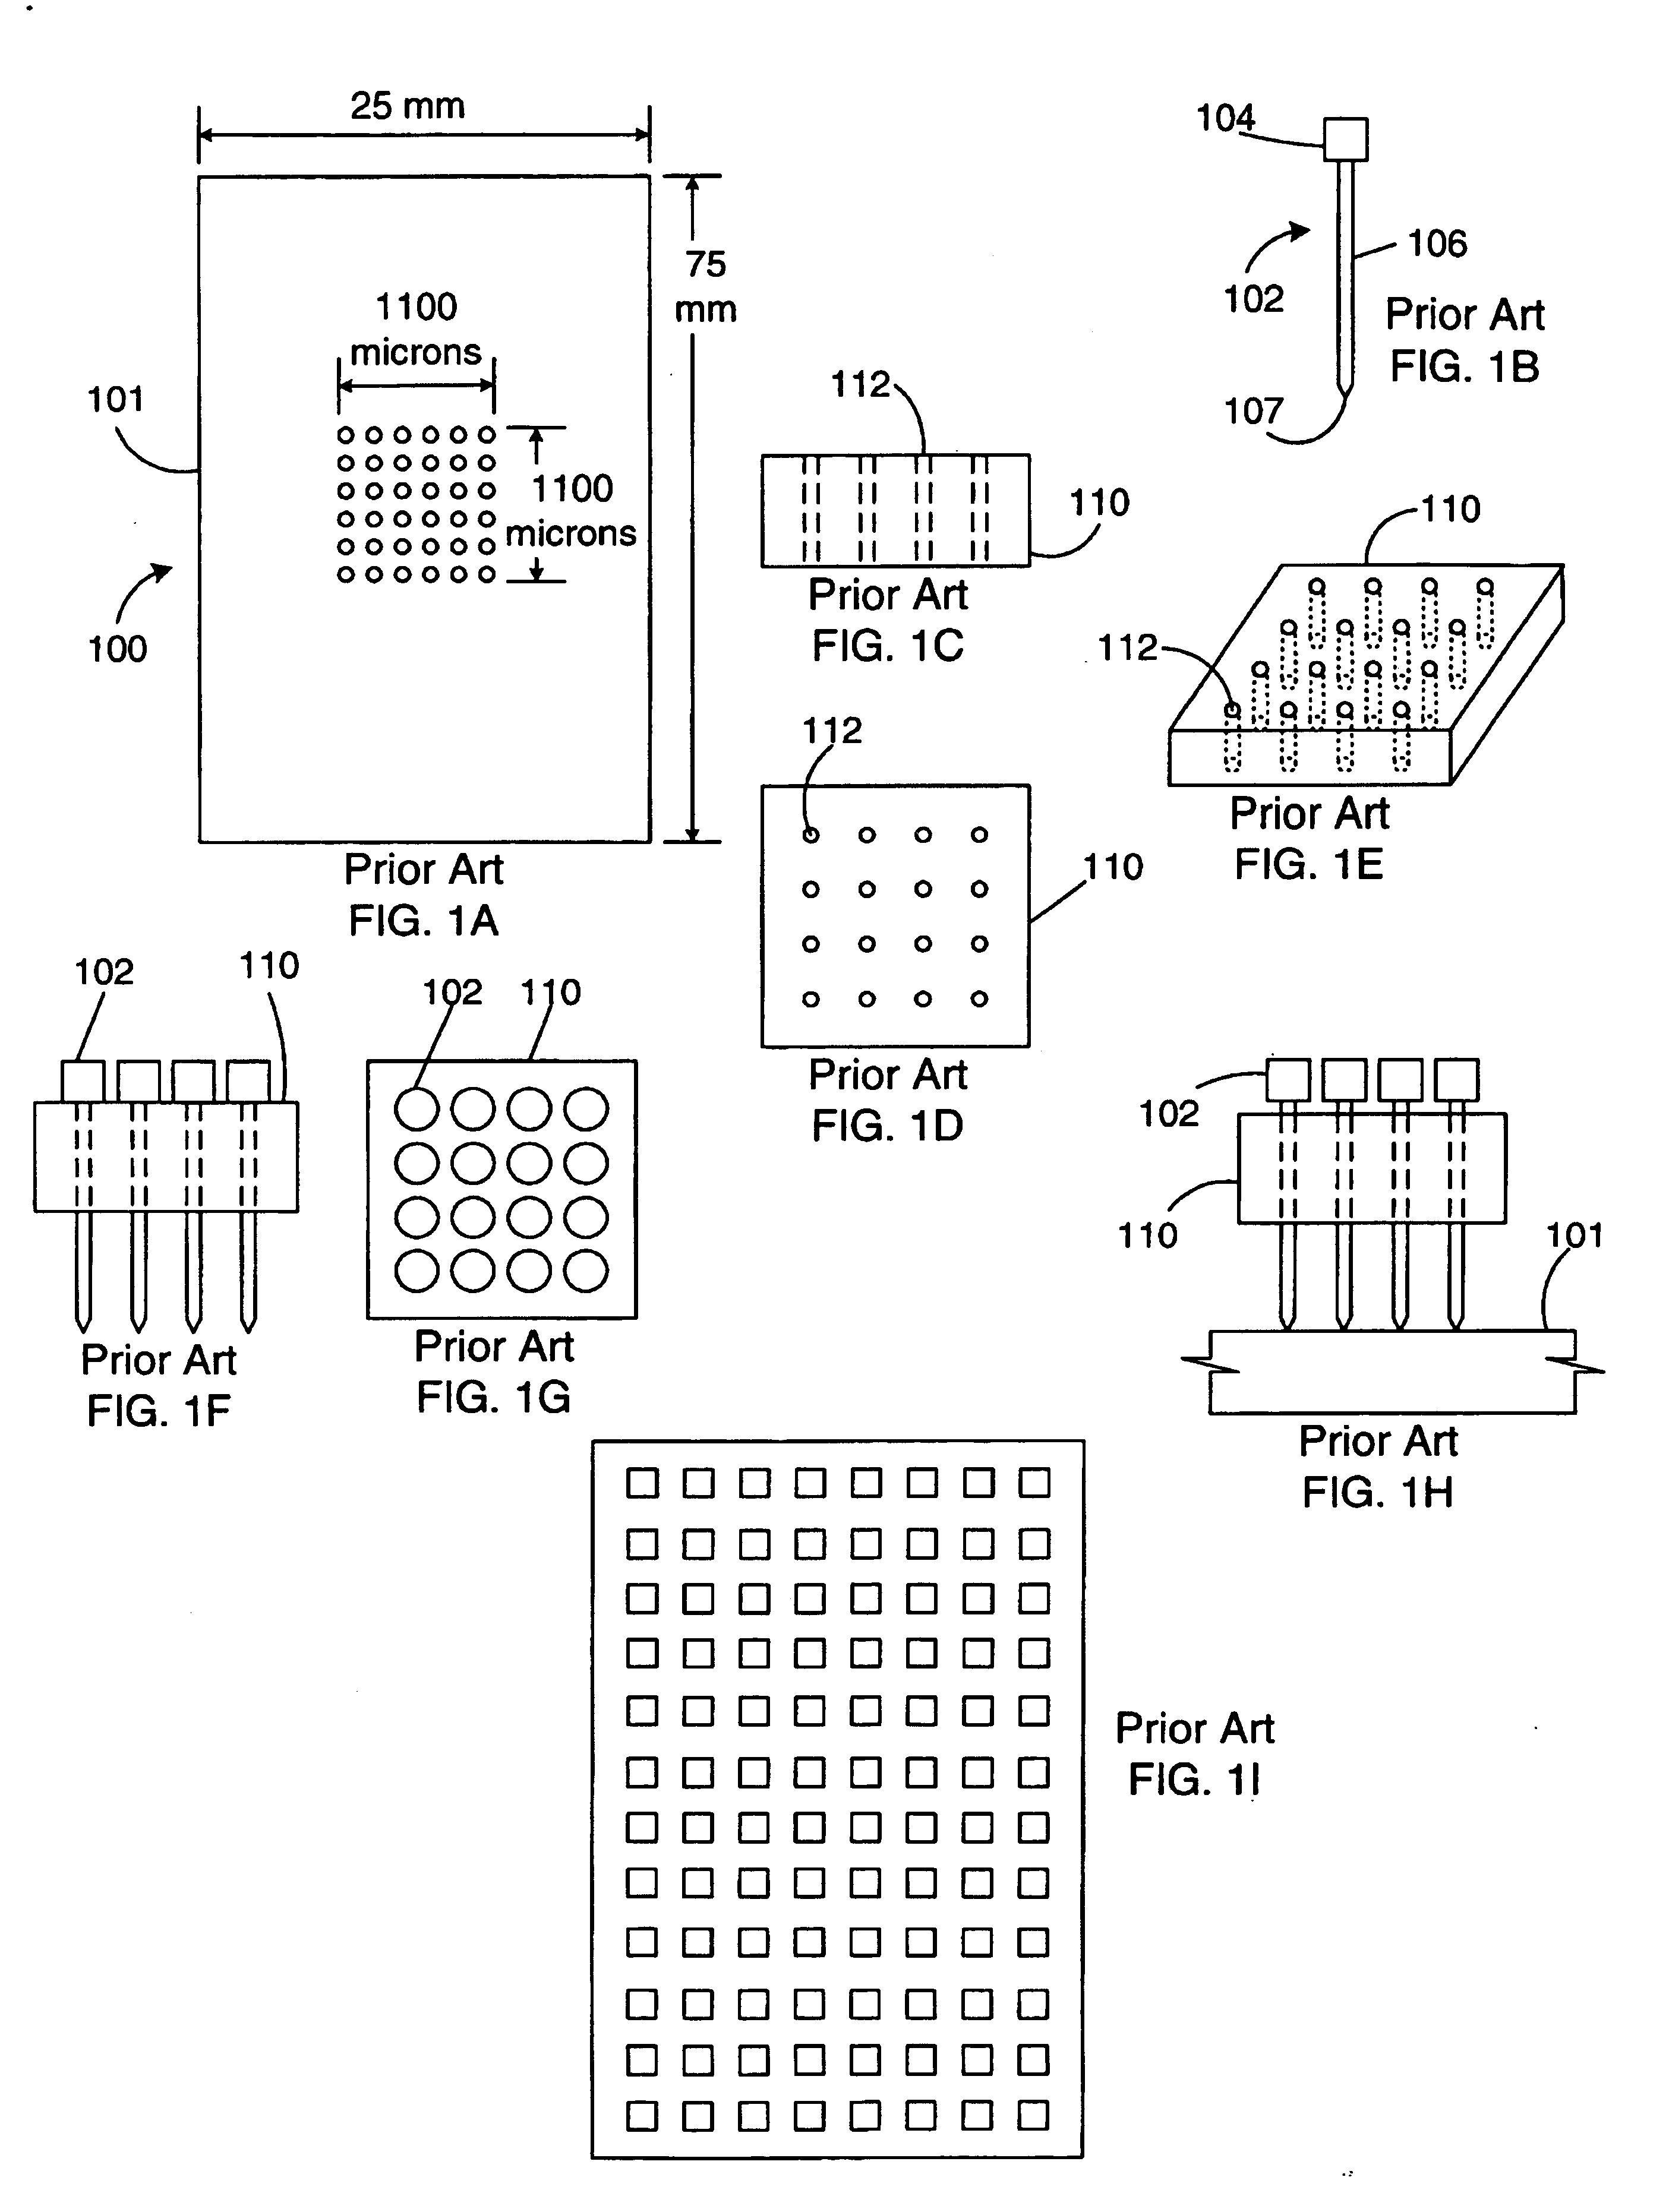 Method and apparatus for automatic pin detection in microarray spotting instruments